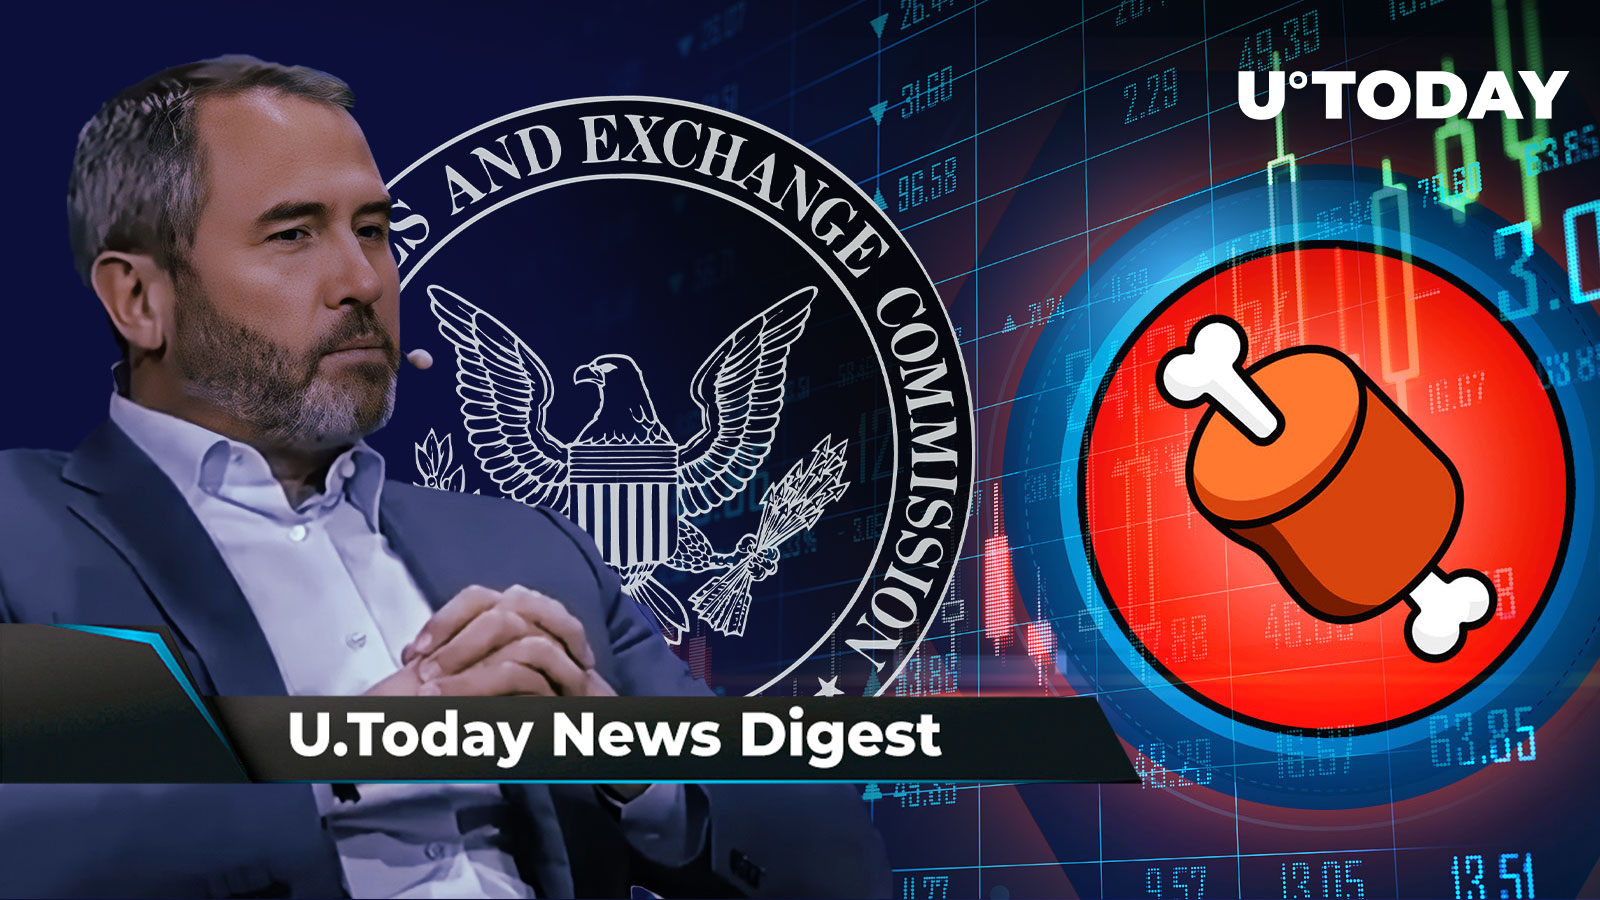 Analyst Issues Warning on XRP Price Trap, Ripple CEO Lacks ‘A Single Polite Word’ After Hinman Emails Unveiling, BONE Listed on New Exchange: Crypto News Digest by U.Today